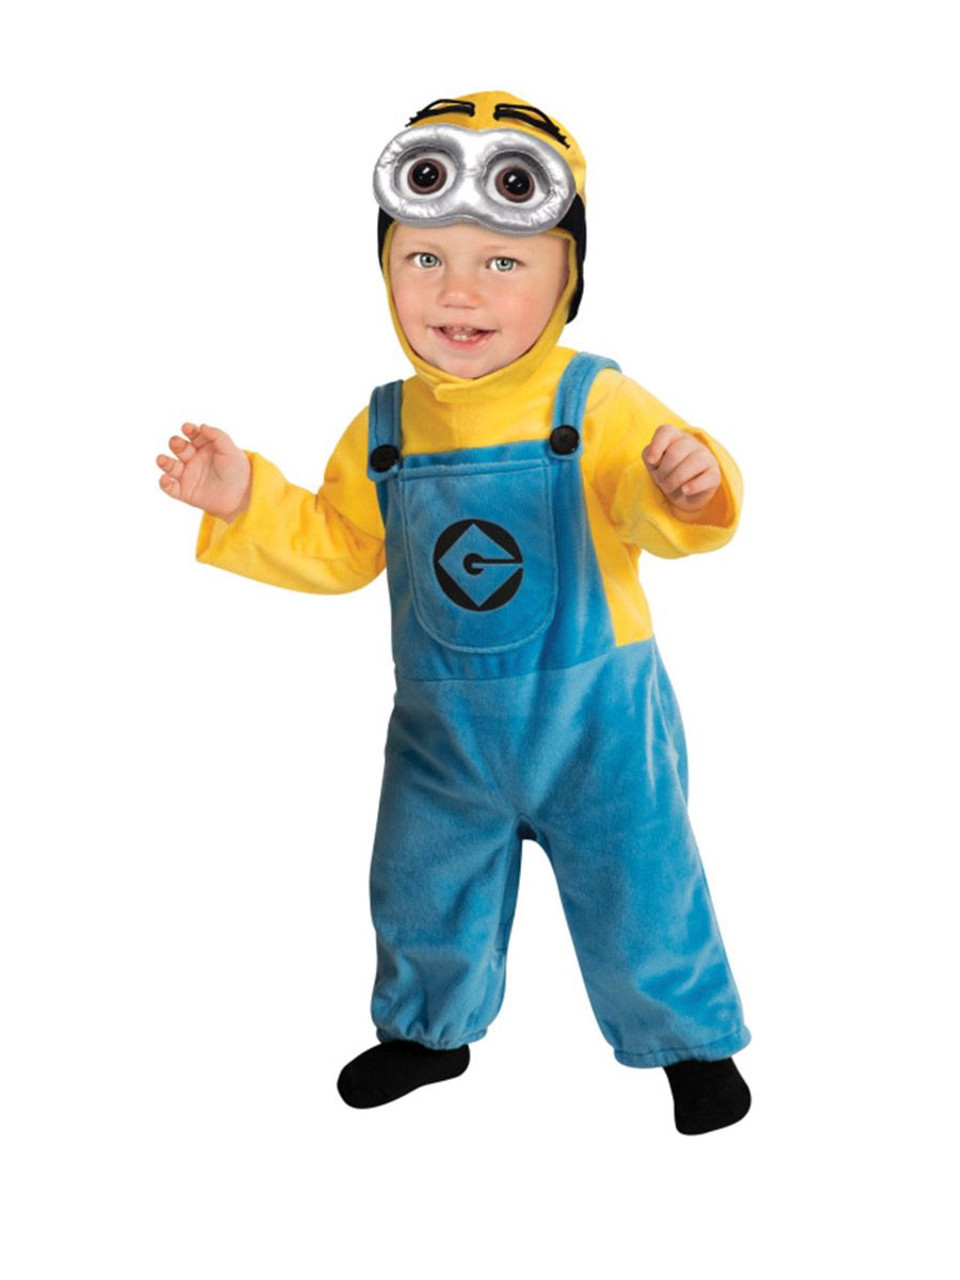 Rubie's Women's Despicable Me 2 Minion Costume with Accessories